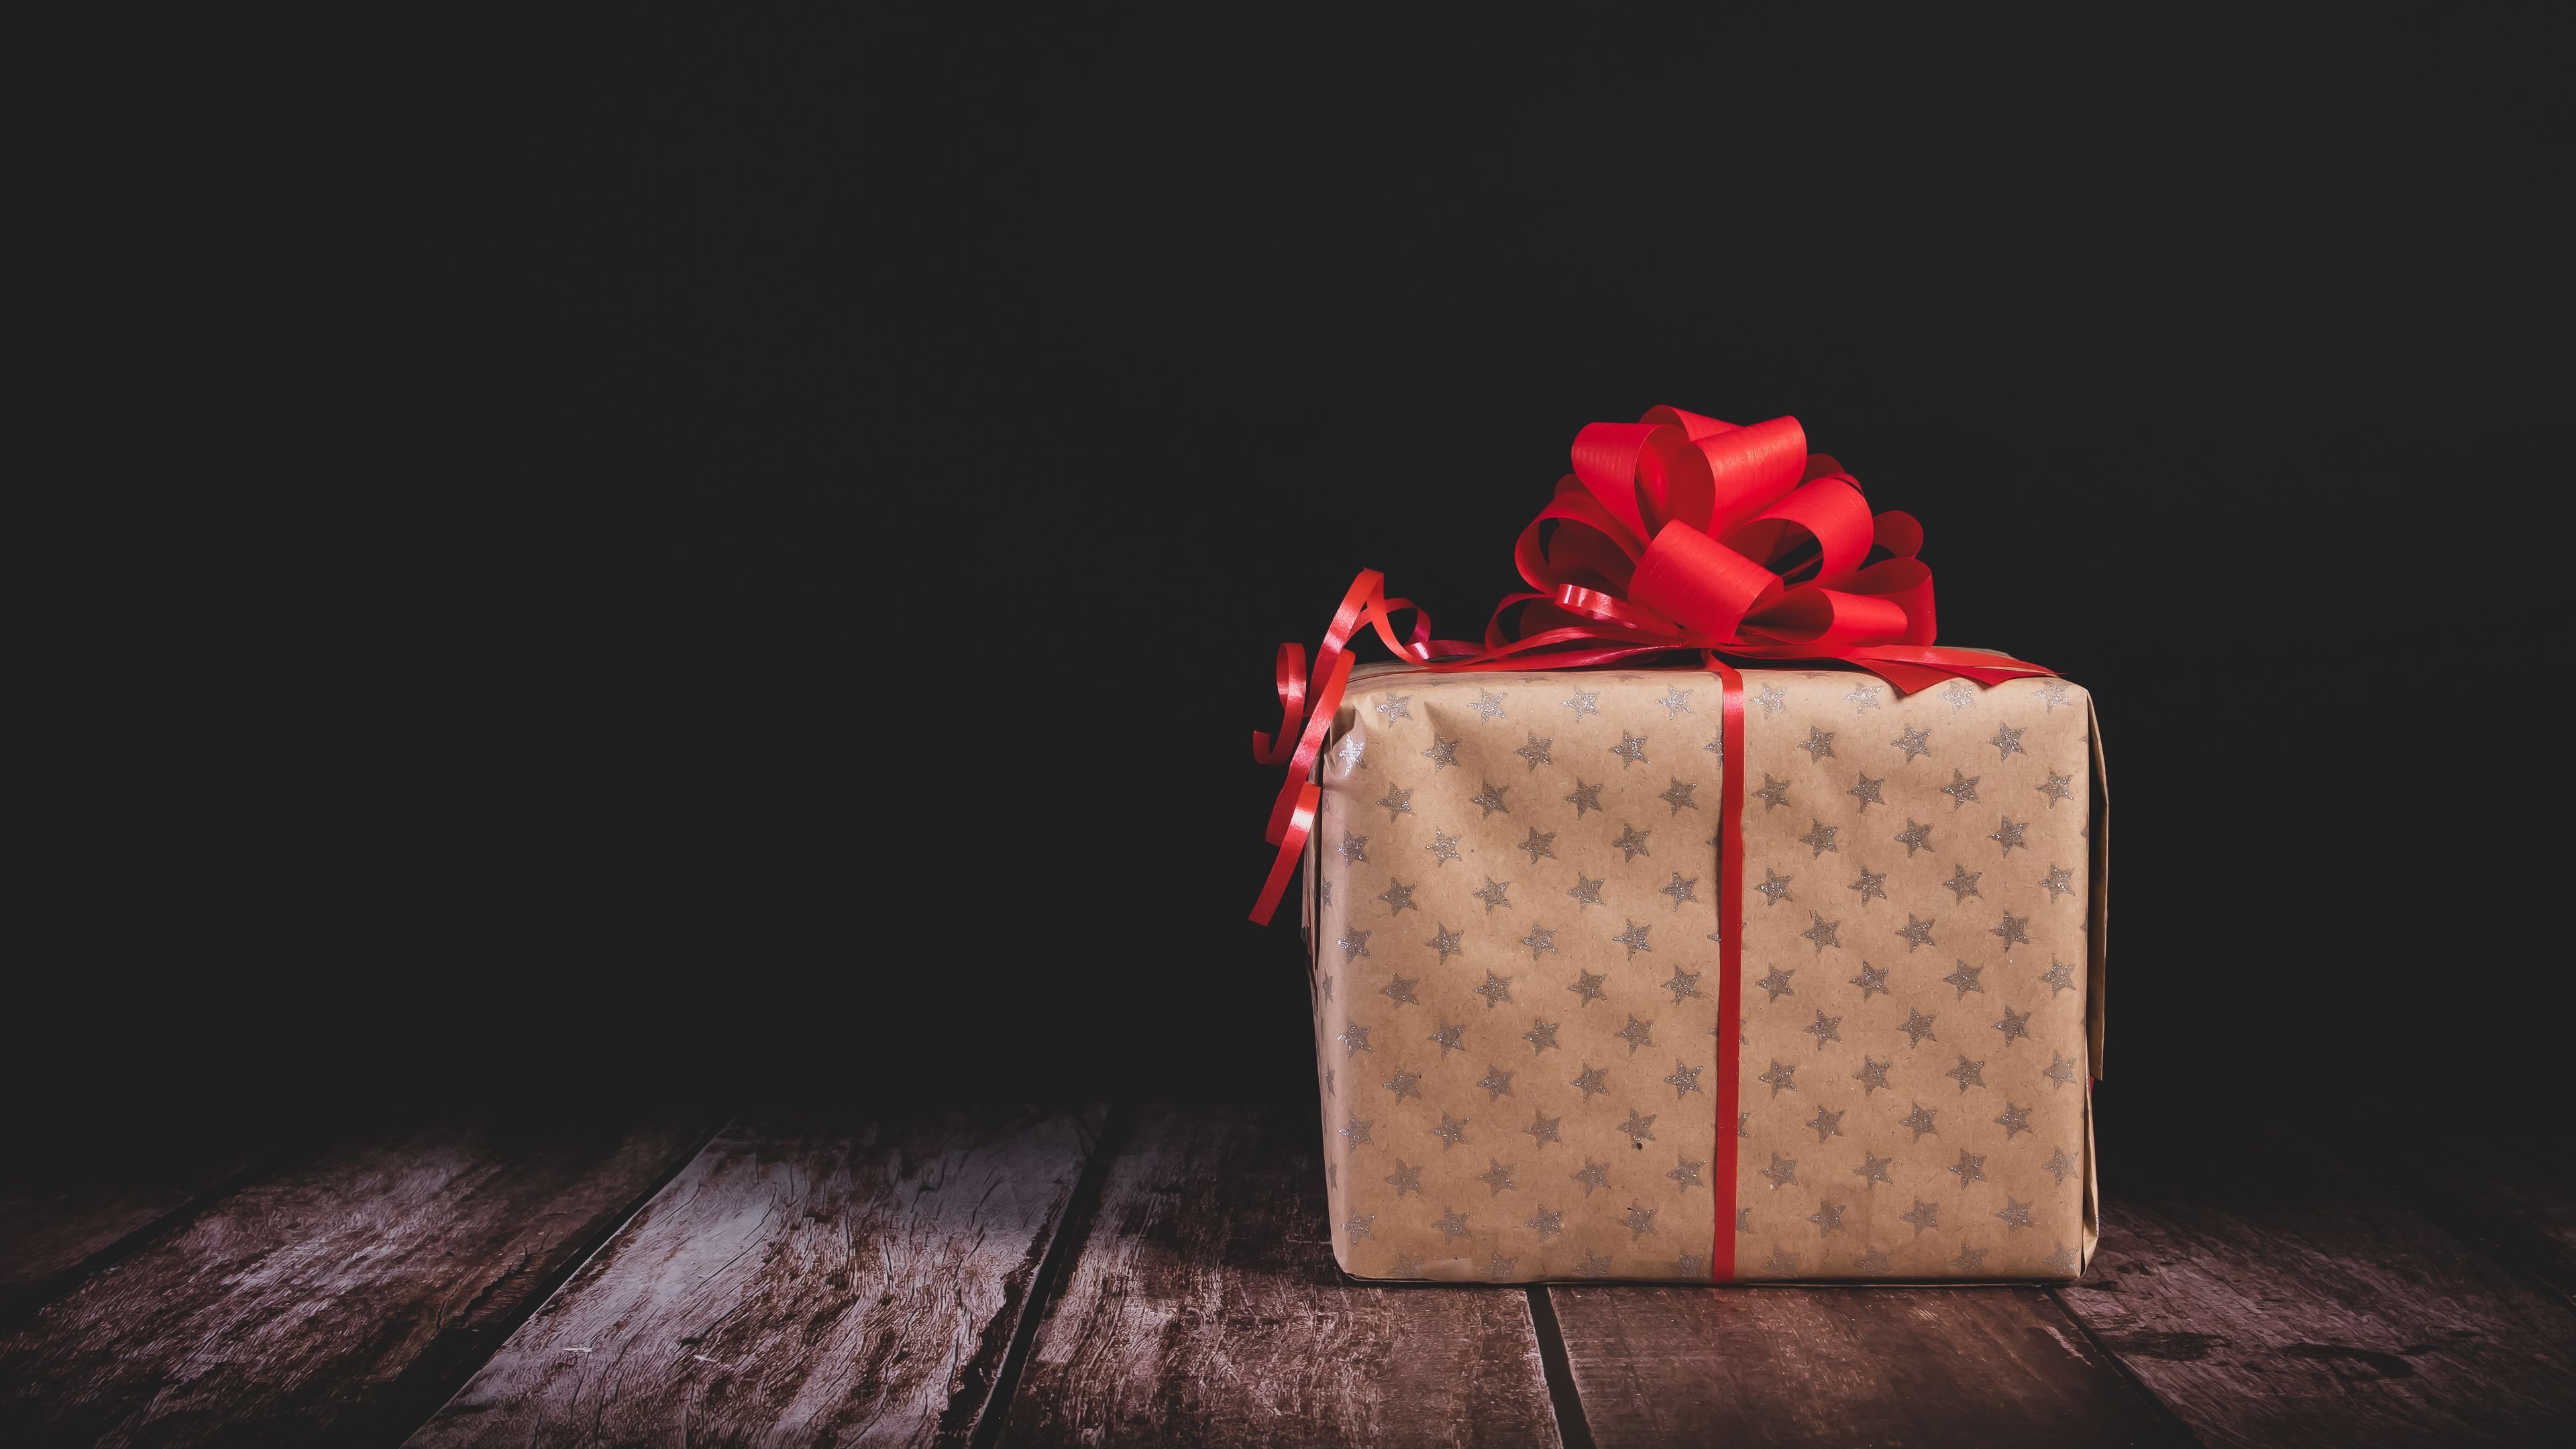 Download wallpaper 3840x2160 gift, box, bow, holiday 4k uhd 16:9 HD background